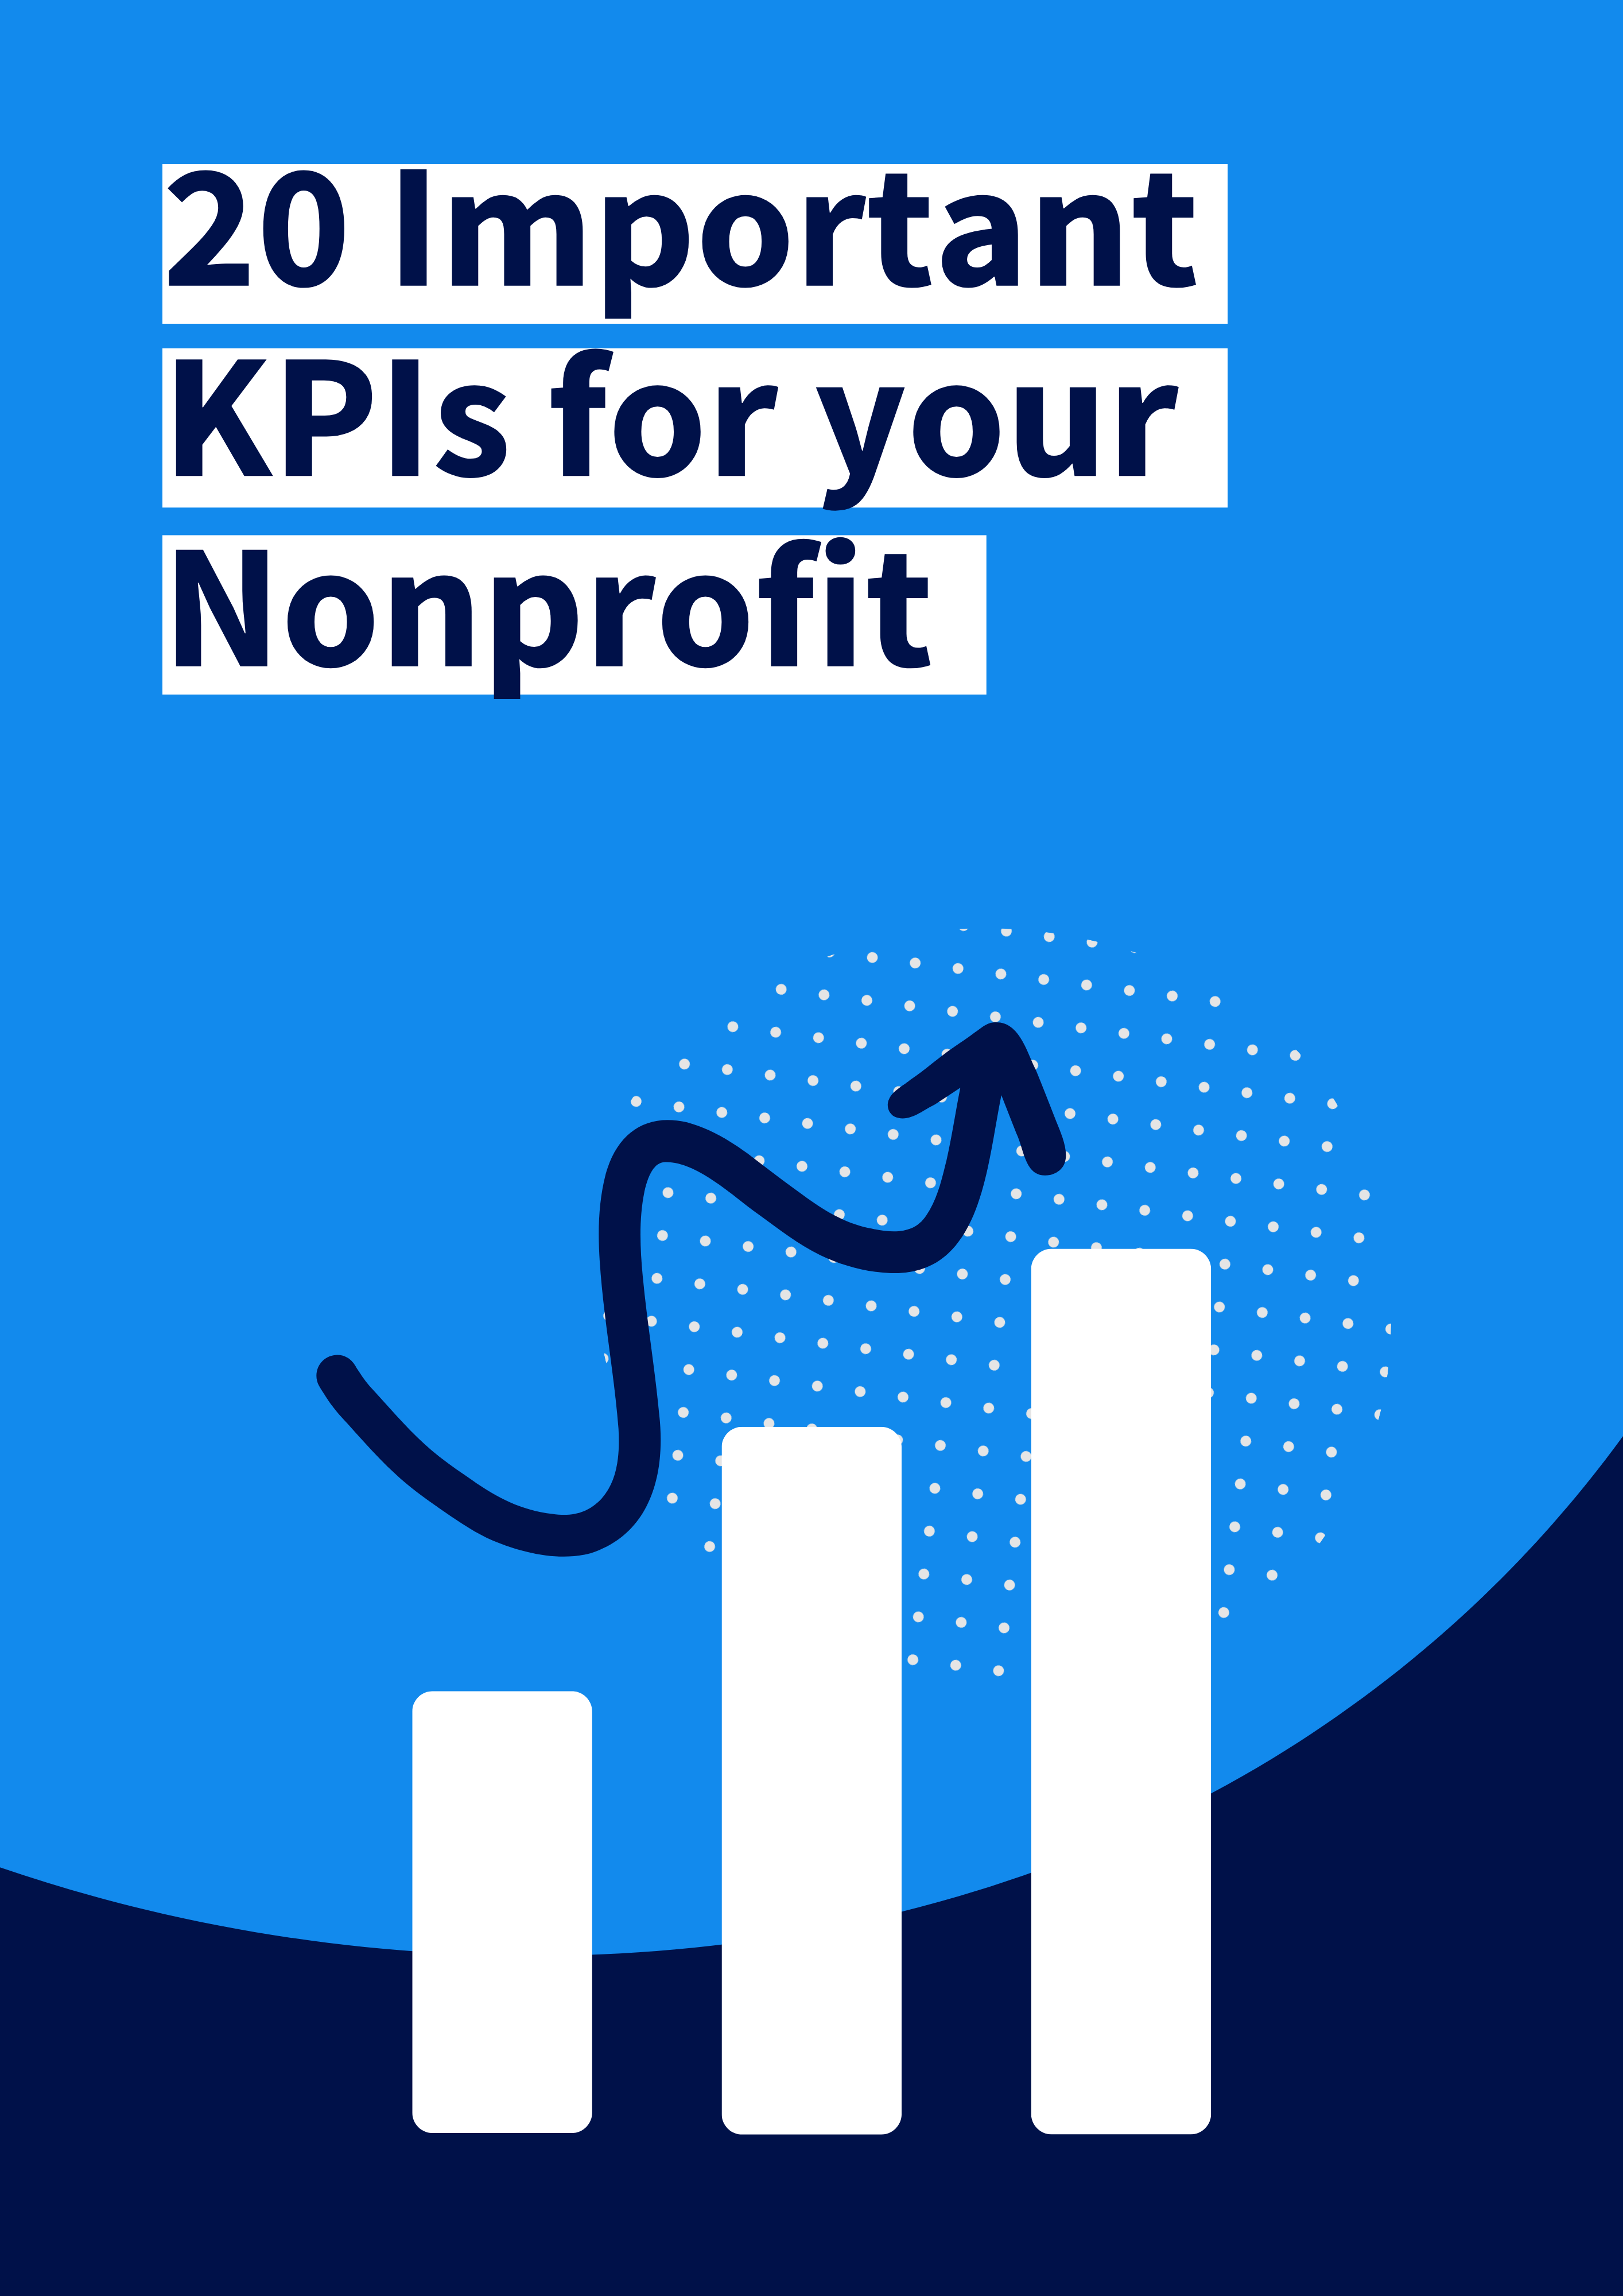 20 Important KPIs for your Nonprofit